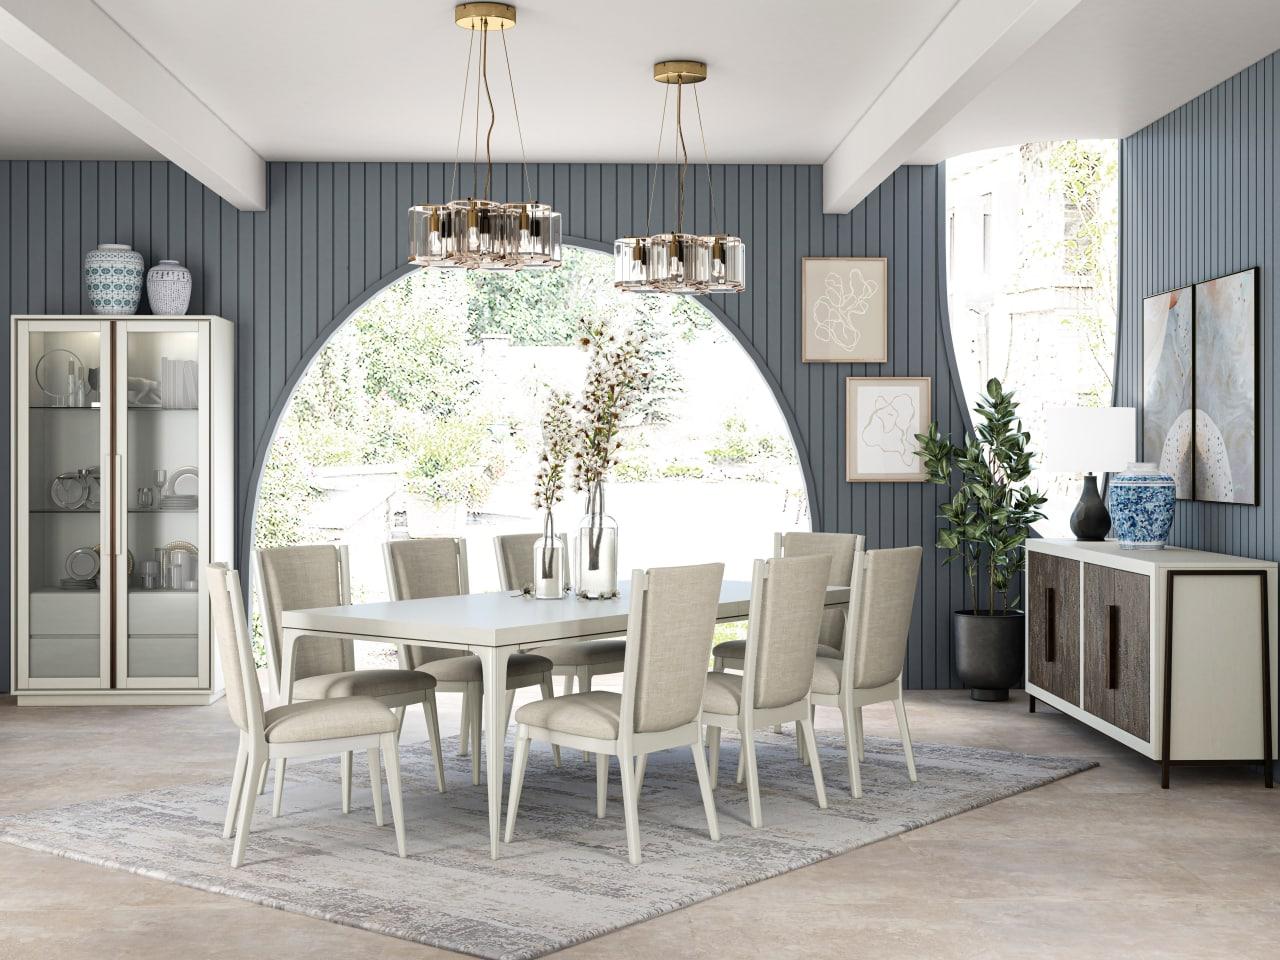 Modern, Casual Dining Table Set Blanc 289220-1040-9pcs in Beige Fabric